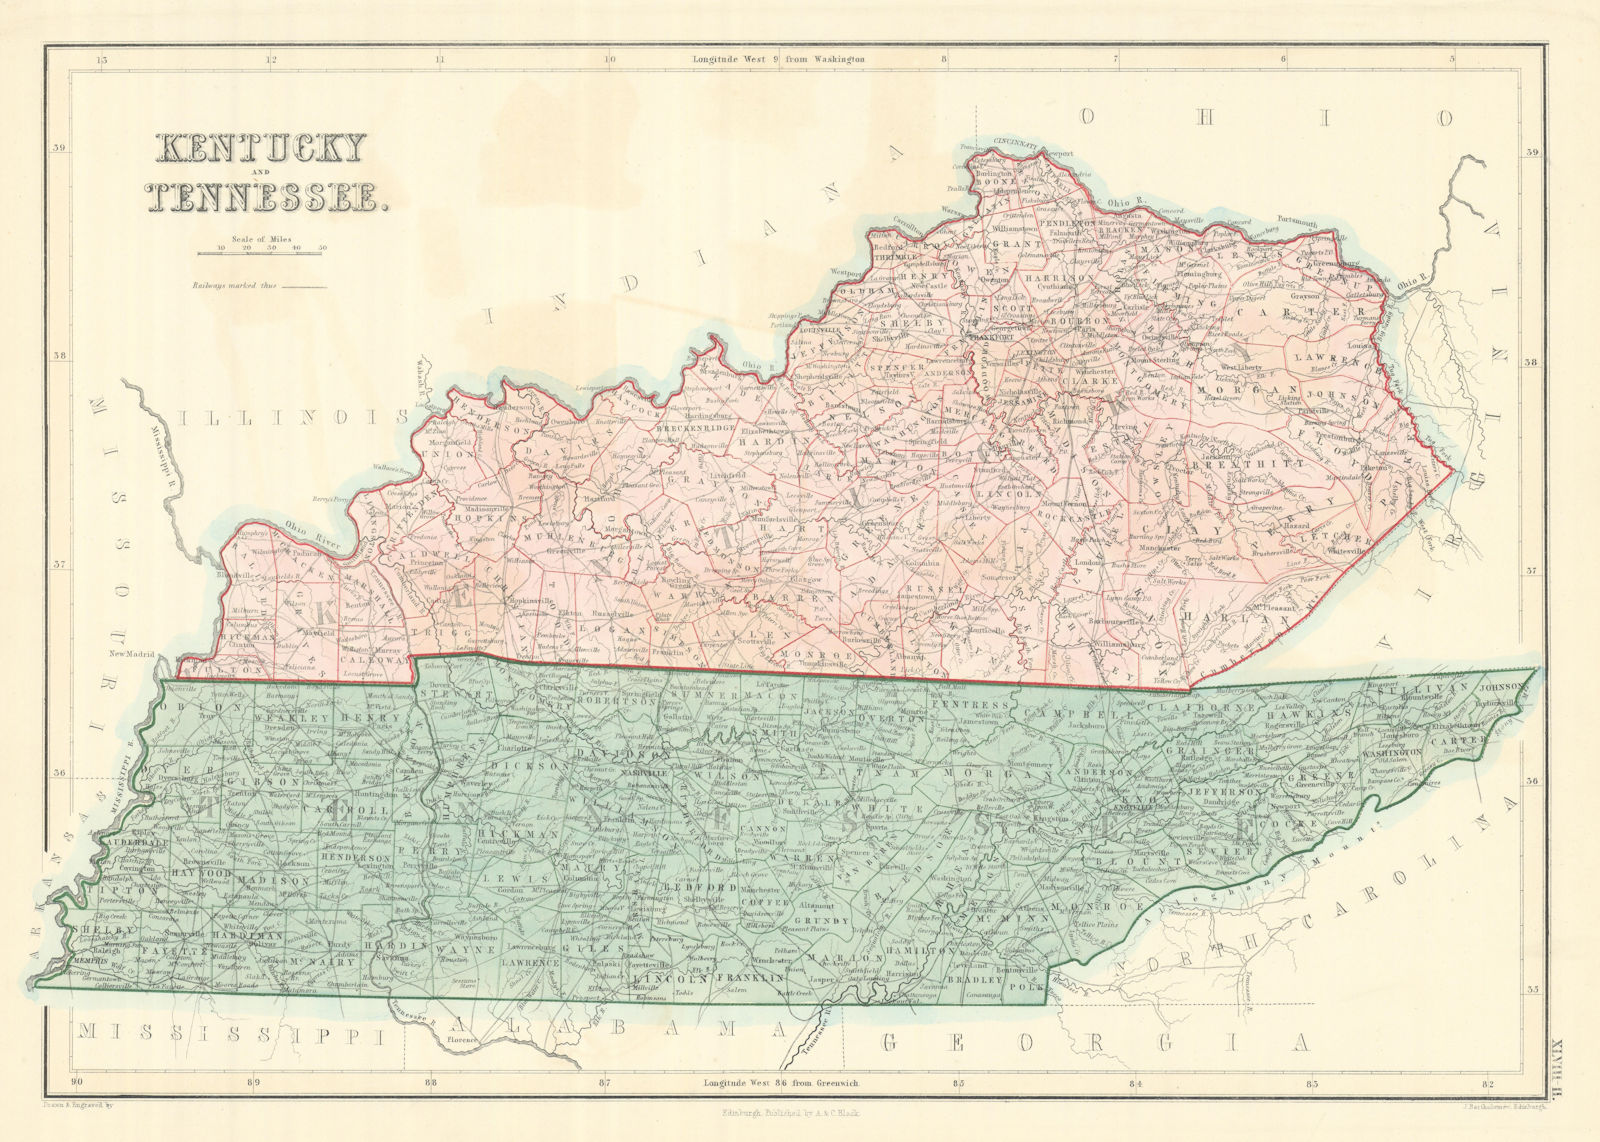 Associate Product Kentucky & Tennessee state map showing counties. JOHN BARTHOLOMEW 1854 old